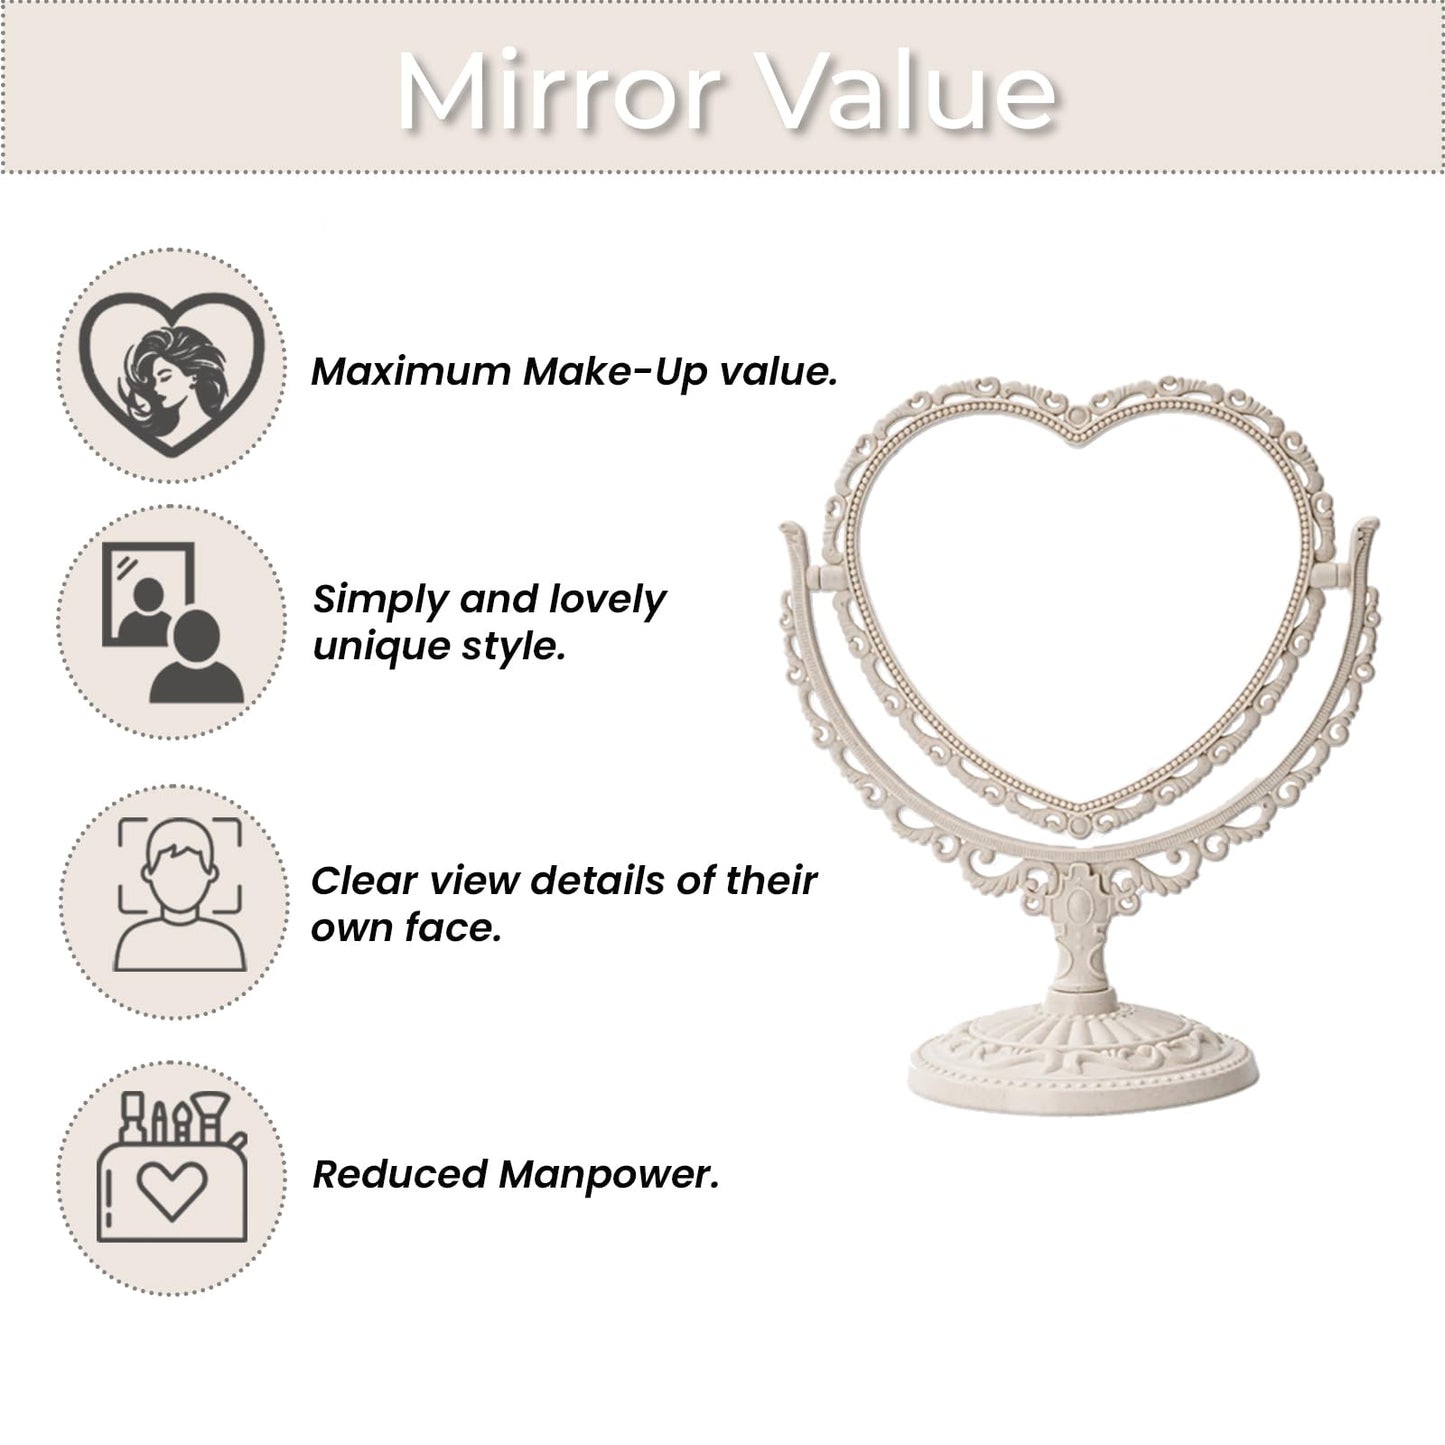 XPXKJ 7 Inch Vintage Heart Mirror - Elegant Desk Makeup Mirror with Double Sided 360 Degree Rotation Vanity Mirror for Coquette Room Decor (Beige 1pcs)